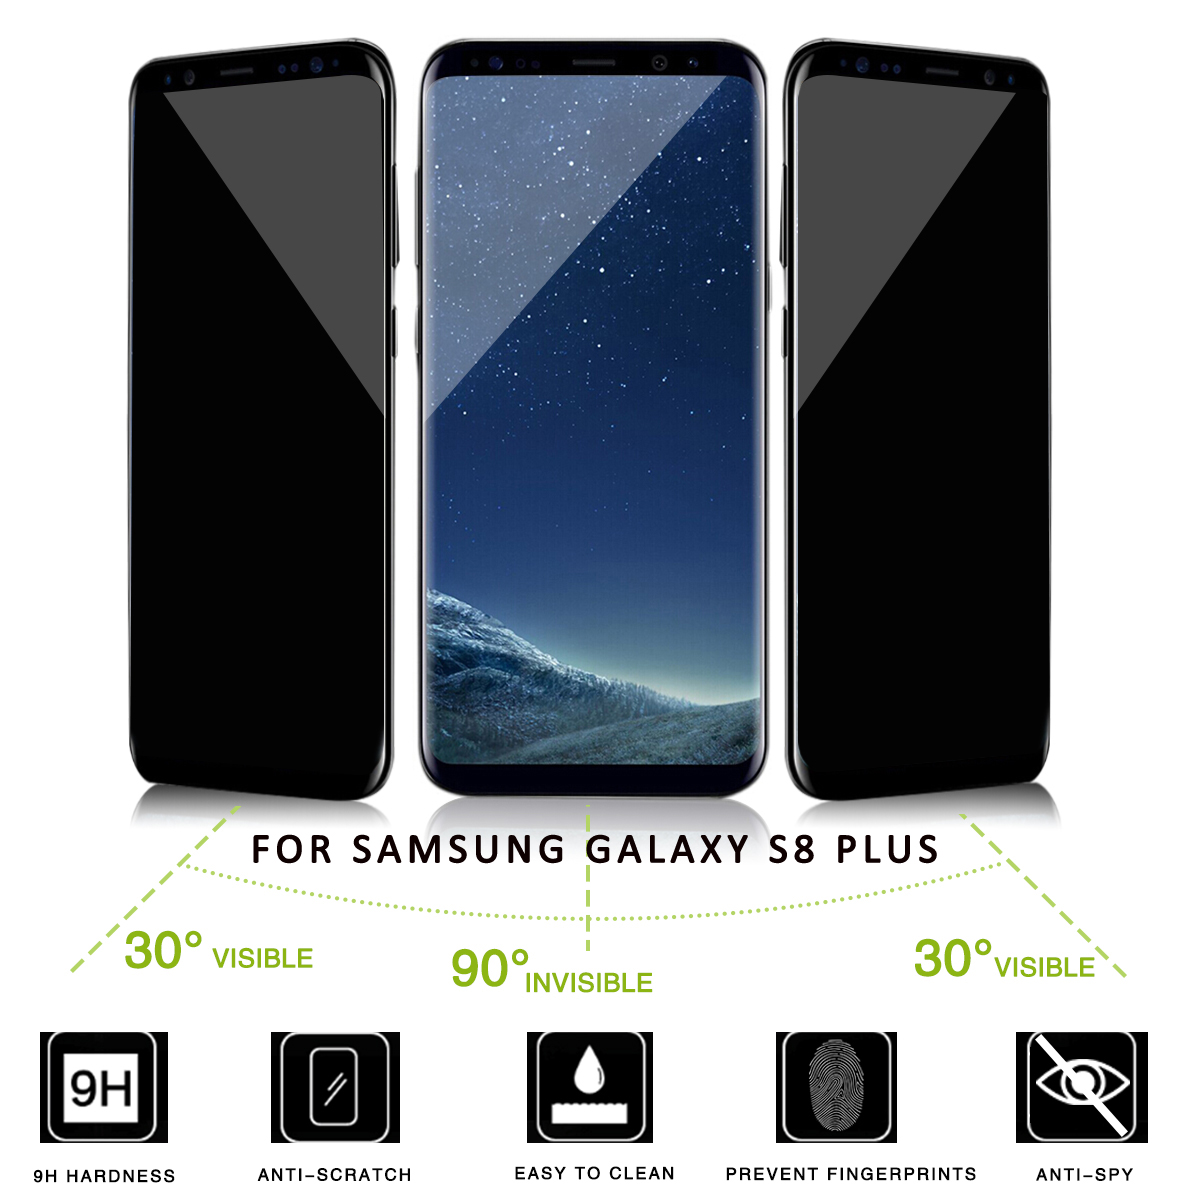 026mm-25D-Anti-Spy-Scratch-Resistant-Tempered-Glass-Screen-Protector-for-Samsung-Galaxy-S8-Plus-1185603